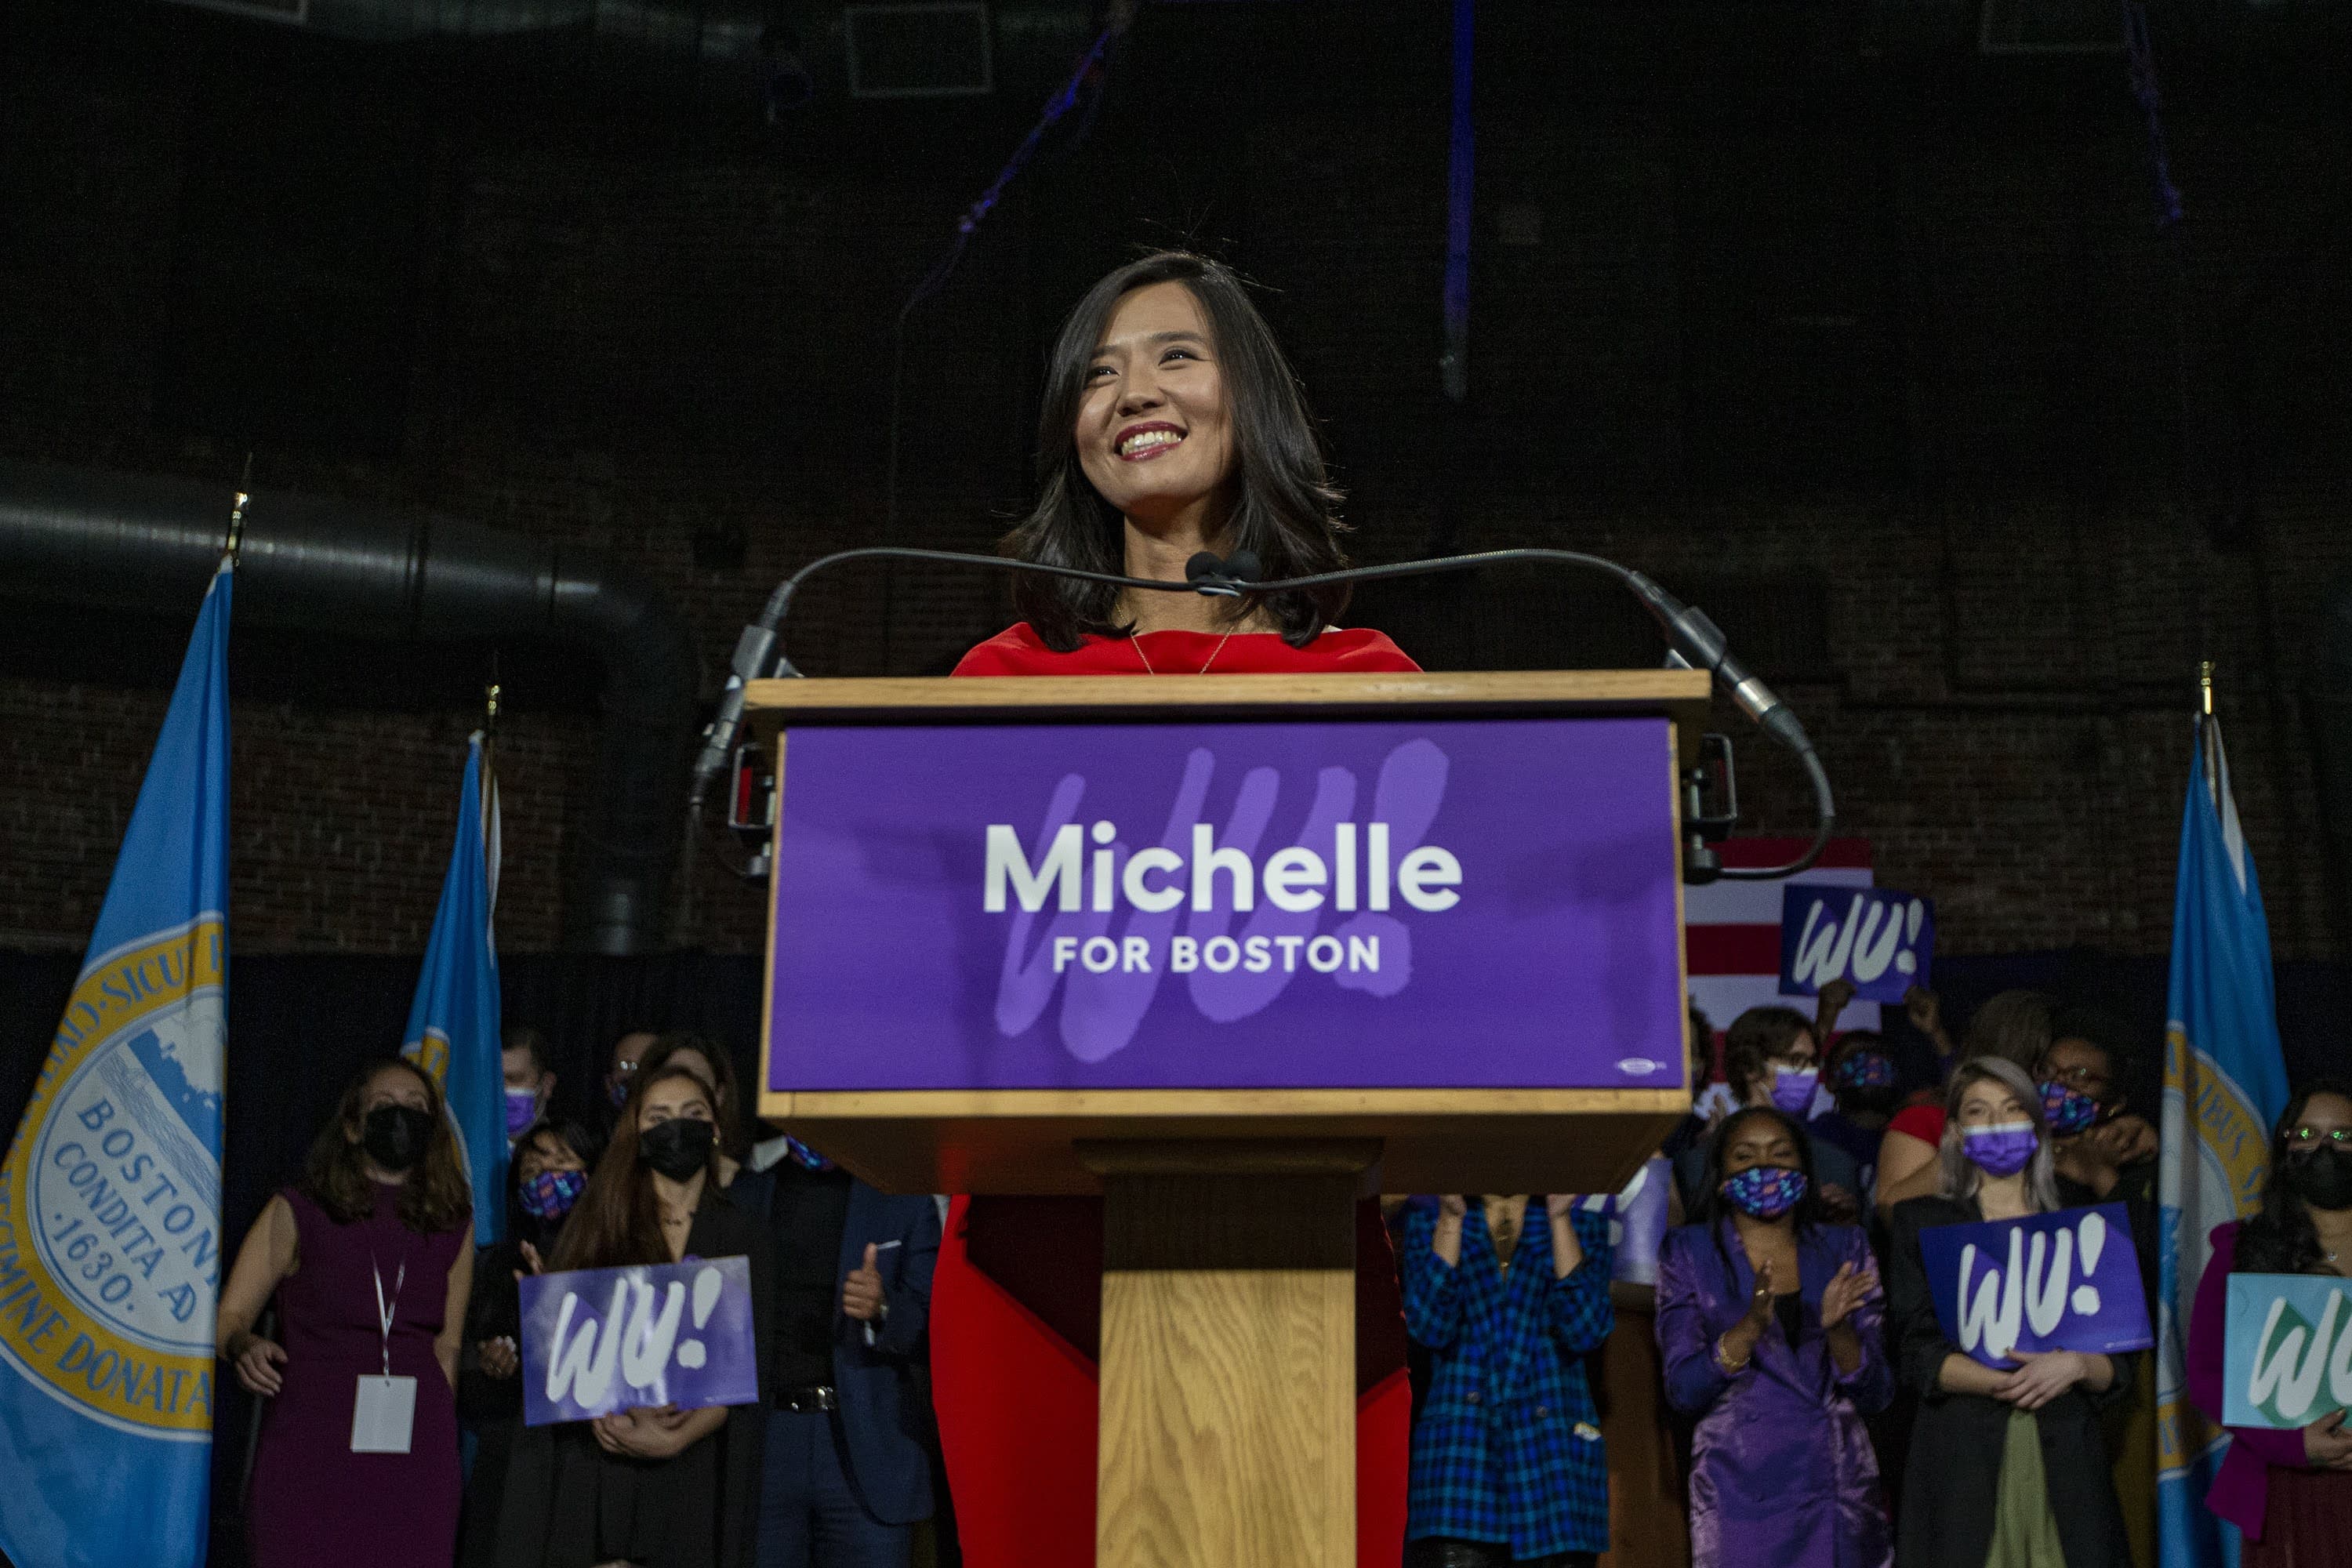 Michelle Wu smiles as she speaks to supporters after winning the election to be Mayor of Boston. (Jesse Costa/WBUR)